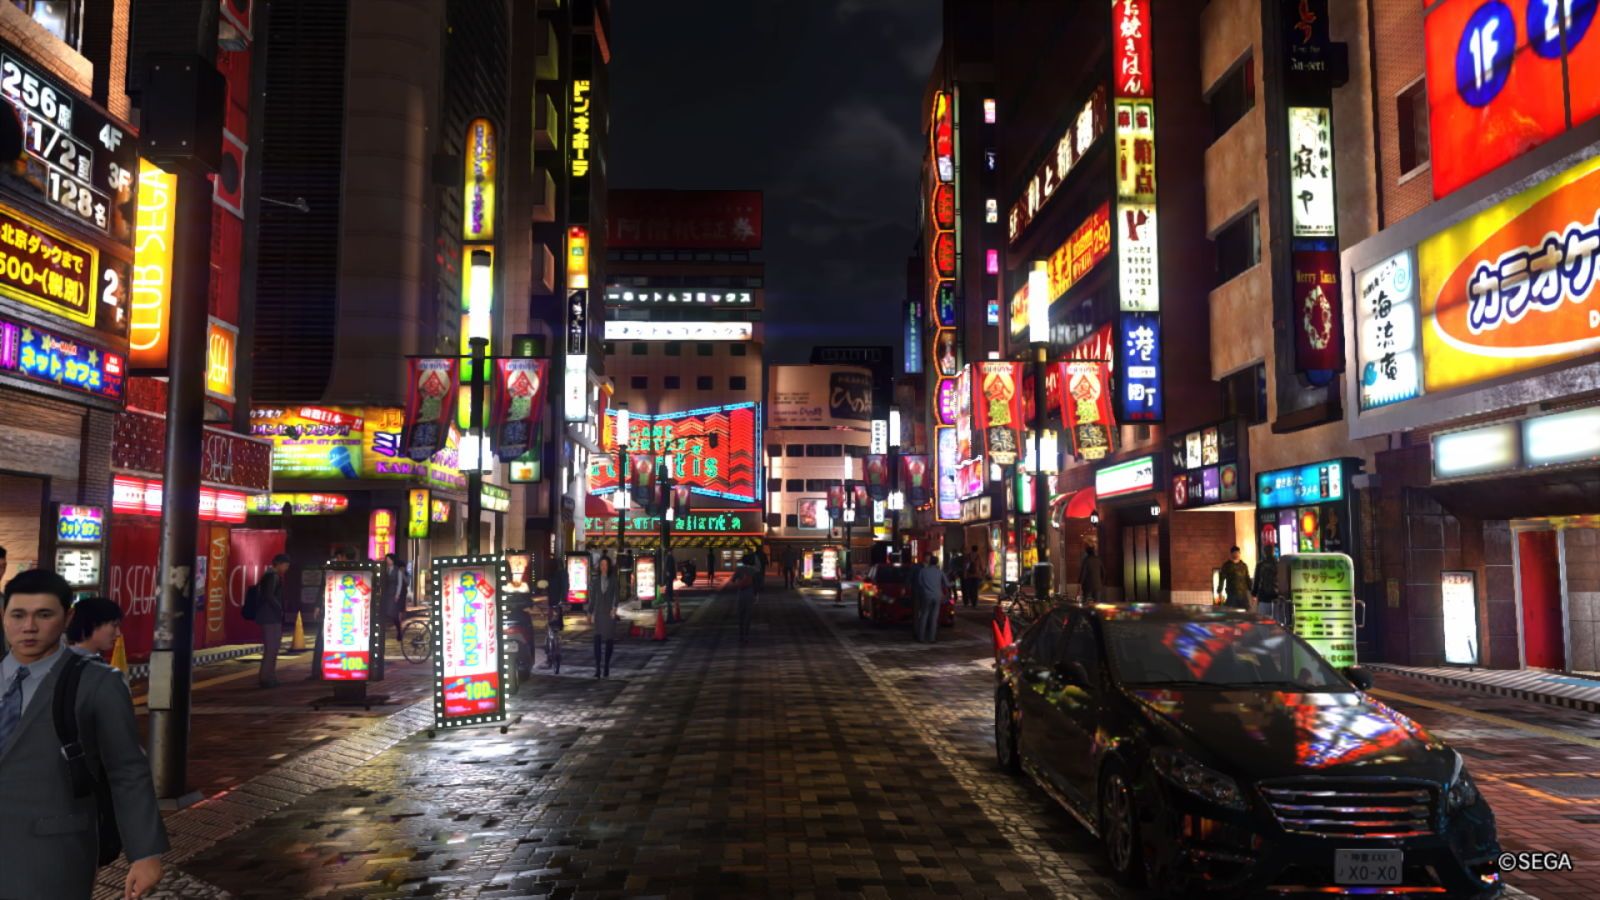 You Can Take Some Lovely Photos In Yakuza Photo City